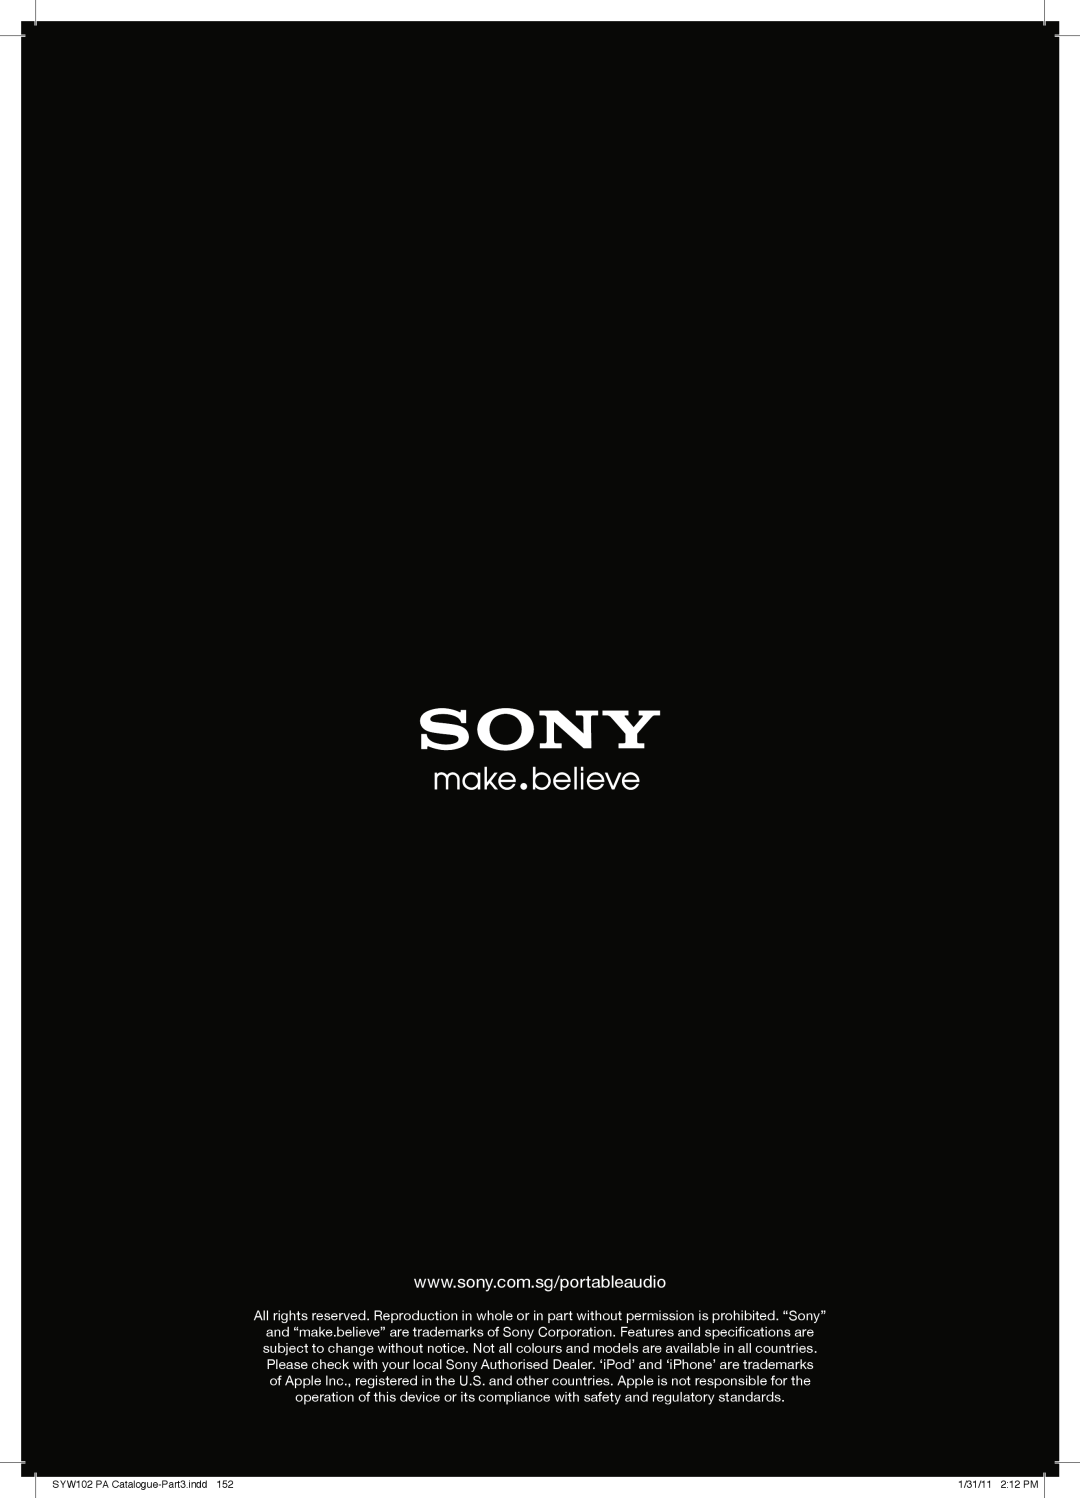 Sony MDRPQ4/PNK manual SYW102 PA Catalogue-Part3.indd152, 1/31/11 2:12 PM 